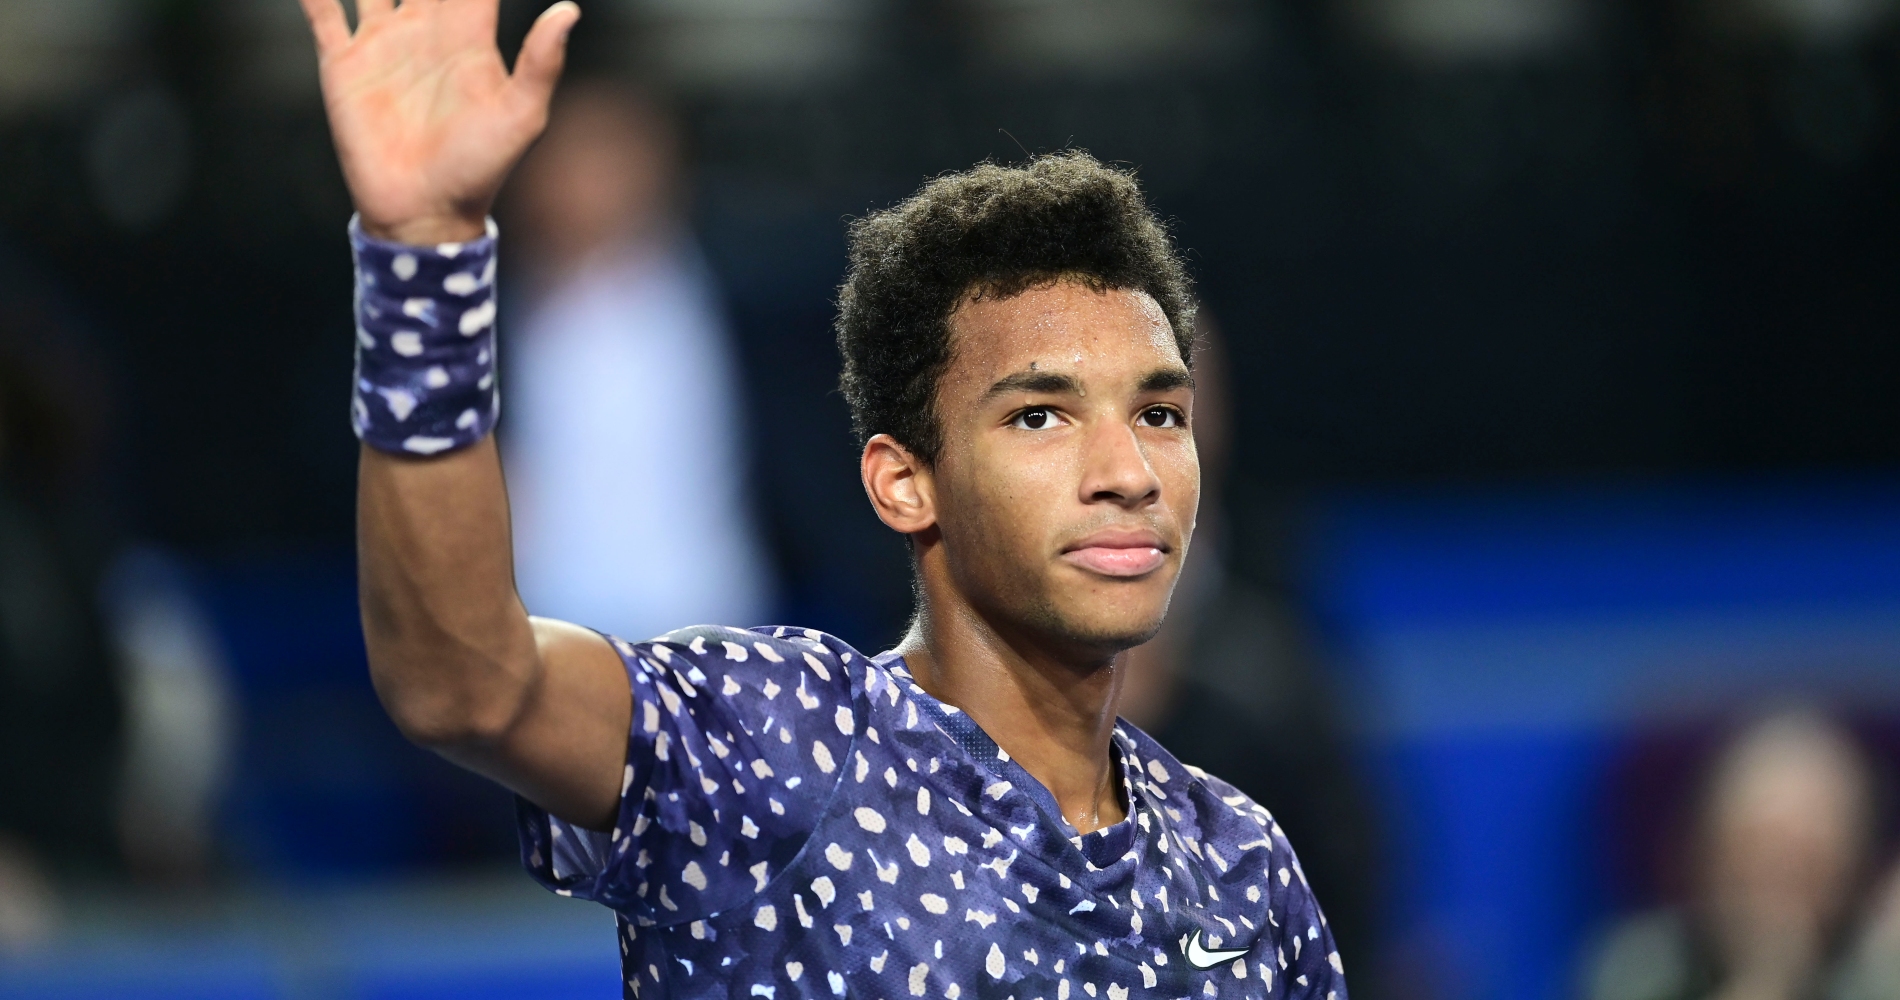 10 Questions About Felix Auger Aliassime Teenage Prodigy Federer Canada Tennis Majors